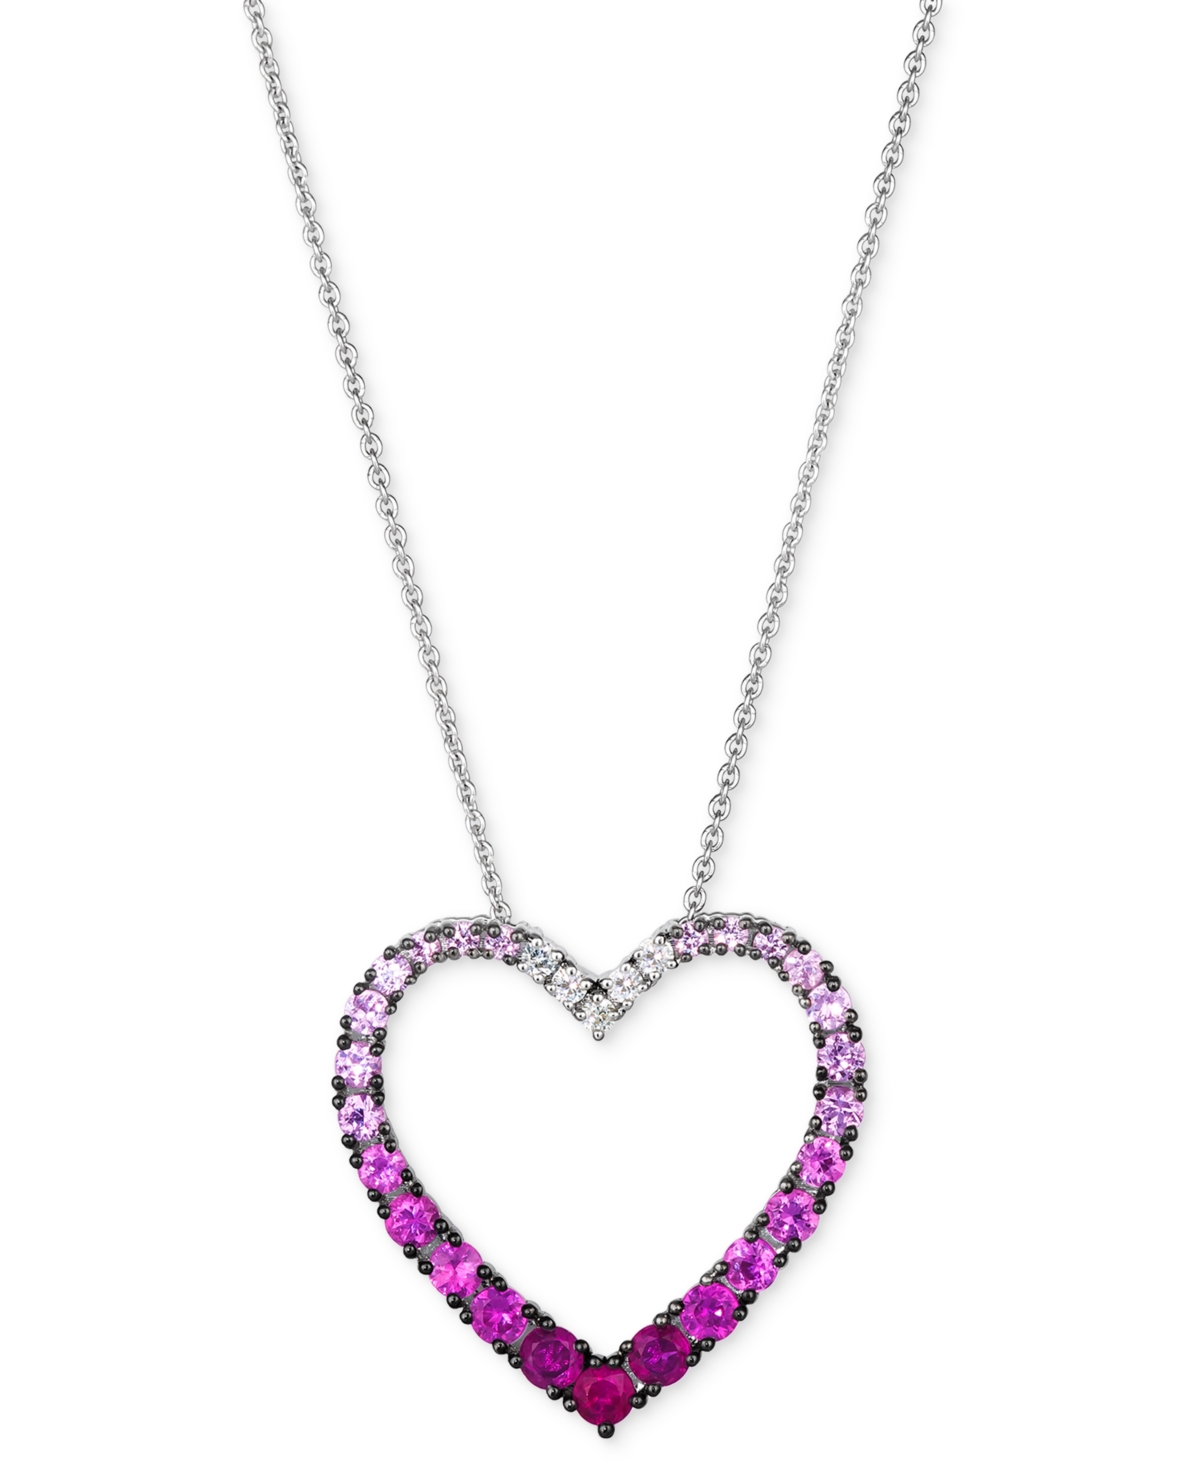 Ombre Pink Sapphire (1 ct. t.w.) & White Sapphire (1/10 ct. t.w.) Open Heart Pendant Necklace in 14k White Gold, 18" + 2" extender